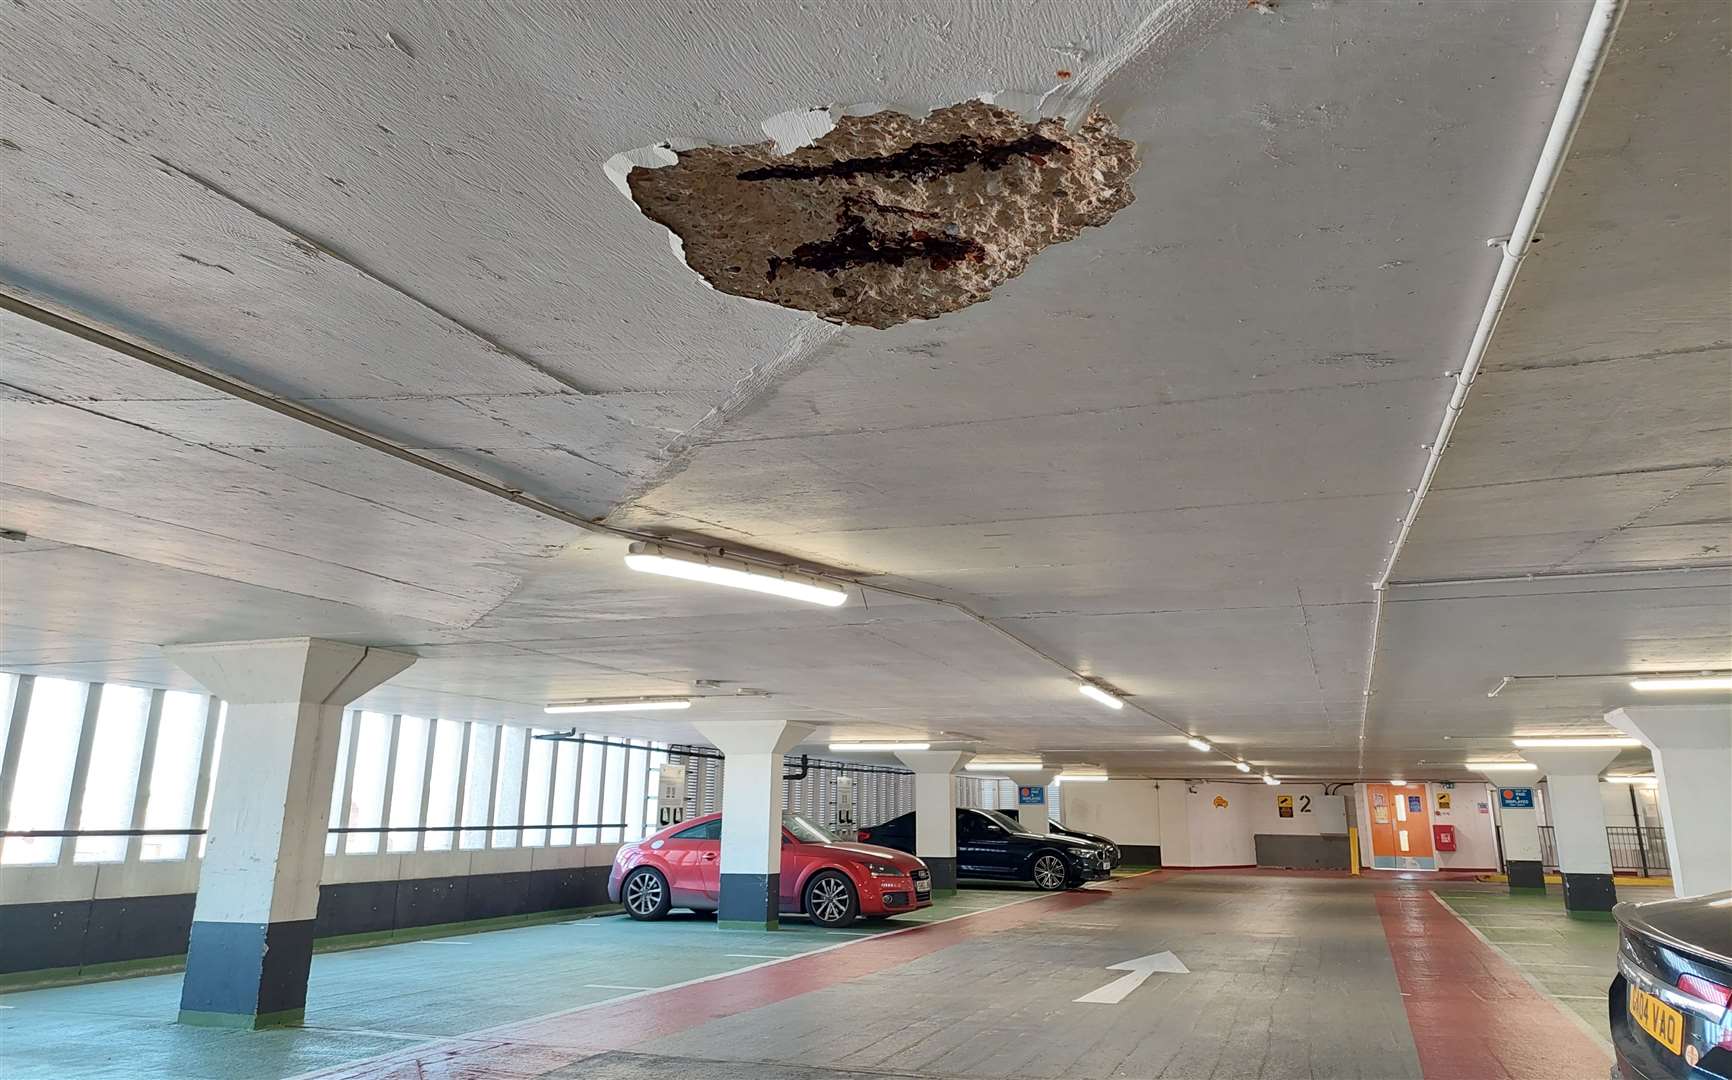 Parts of the ceiling fell during the summer heatwave